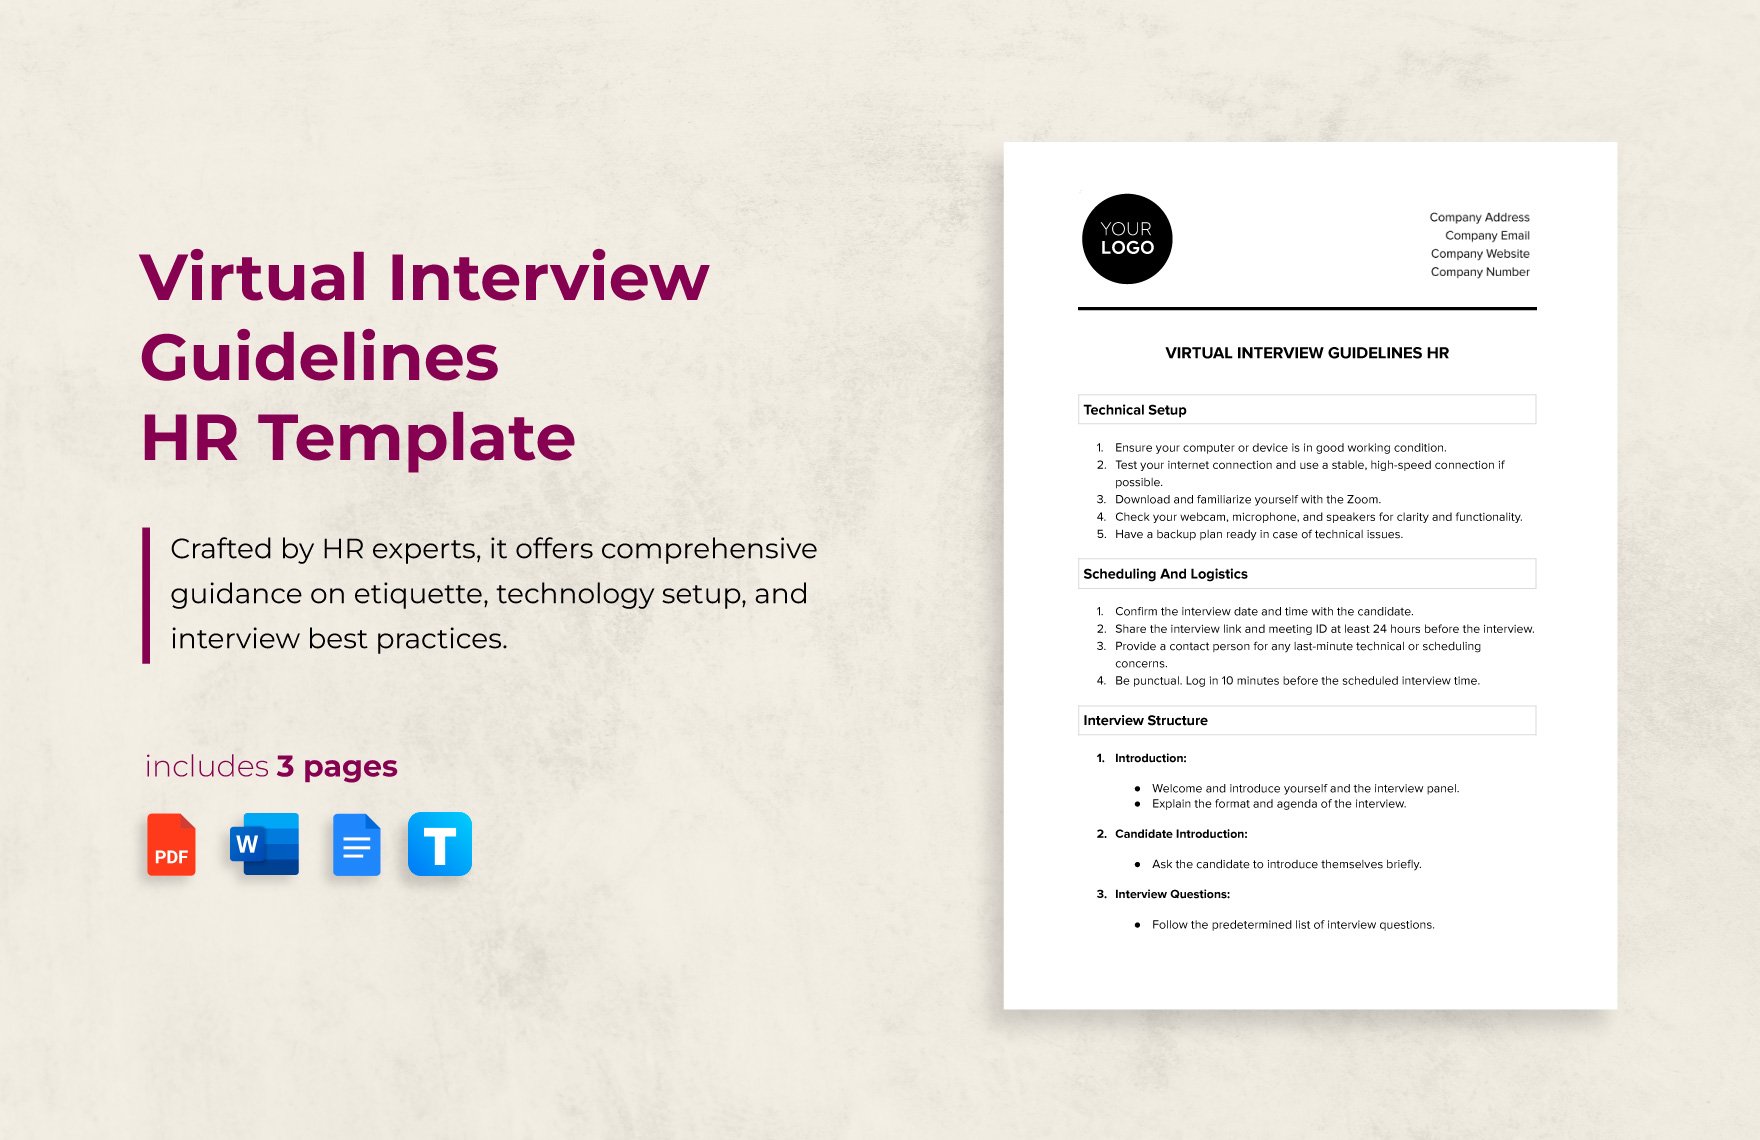 Virtual Interview Guidelines HR Template